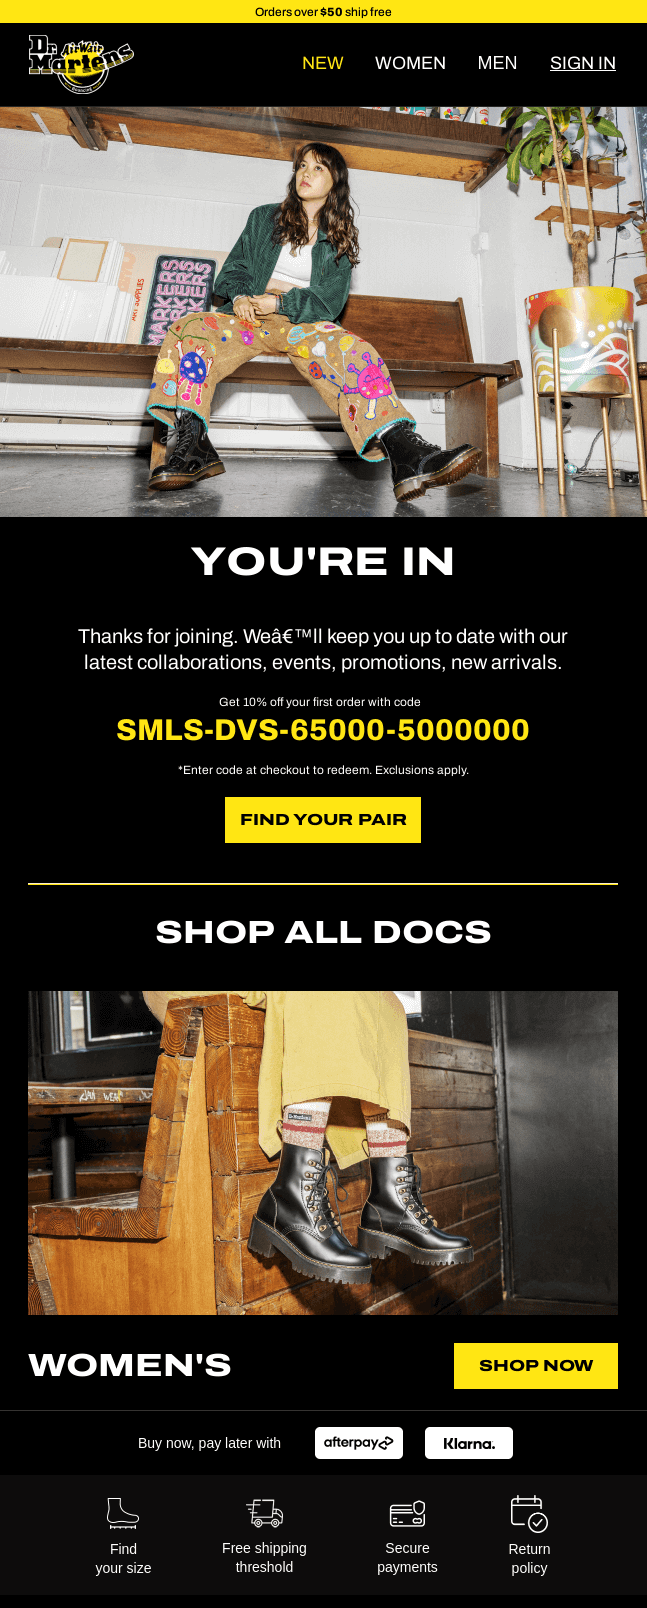 DrMartens_welcome_email_example